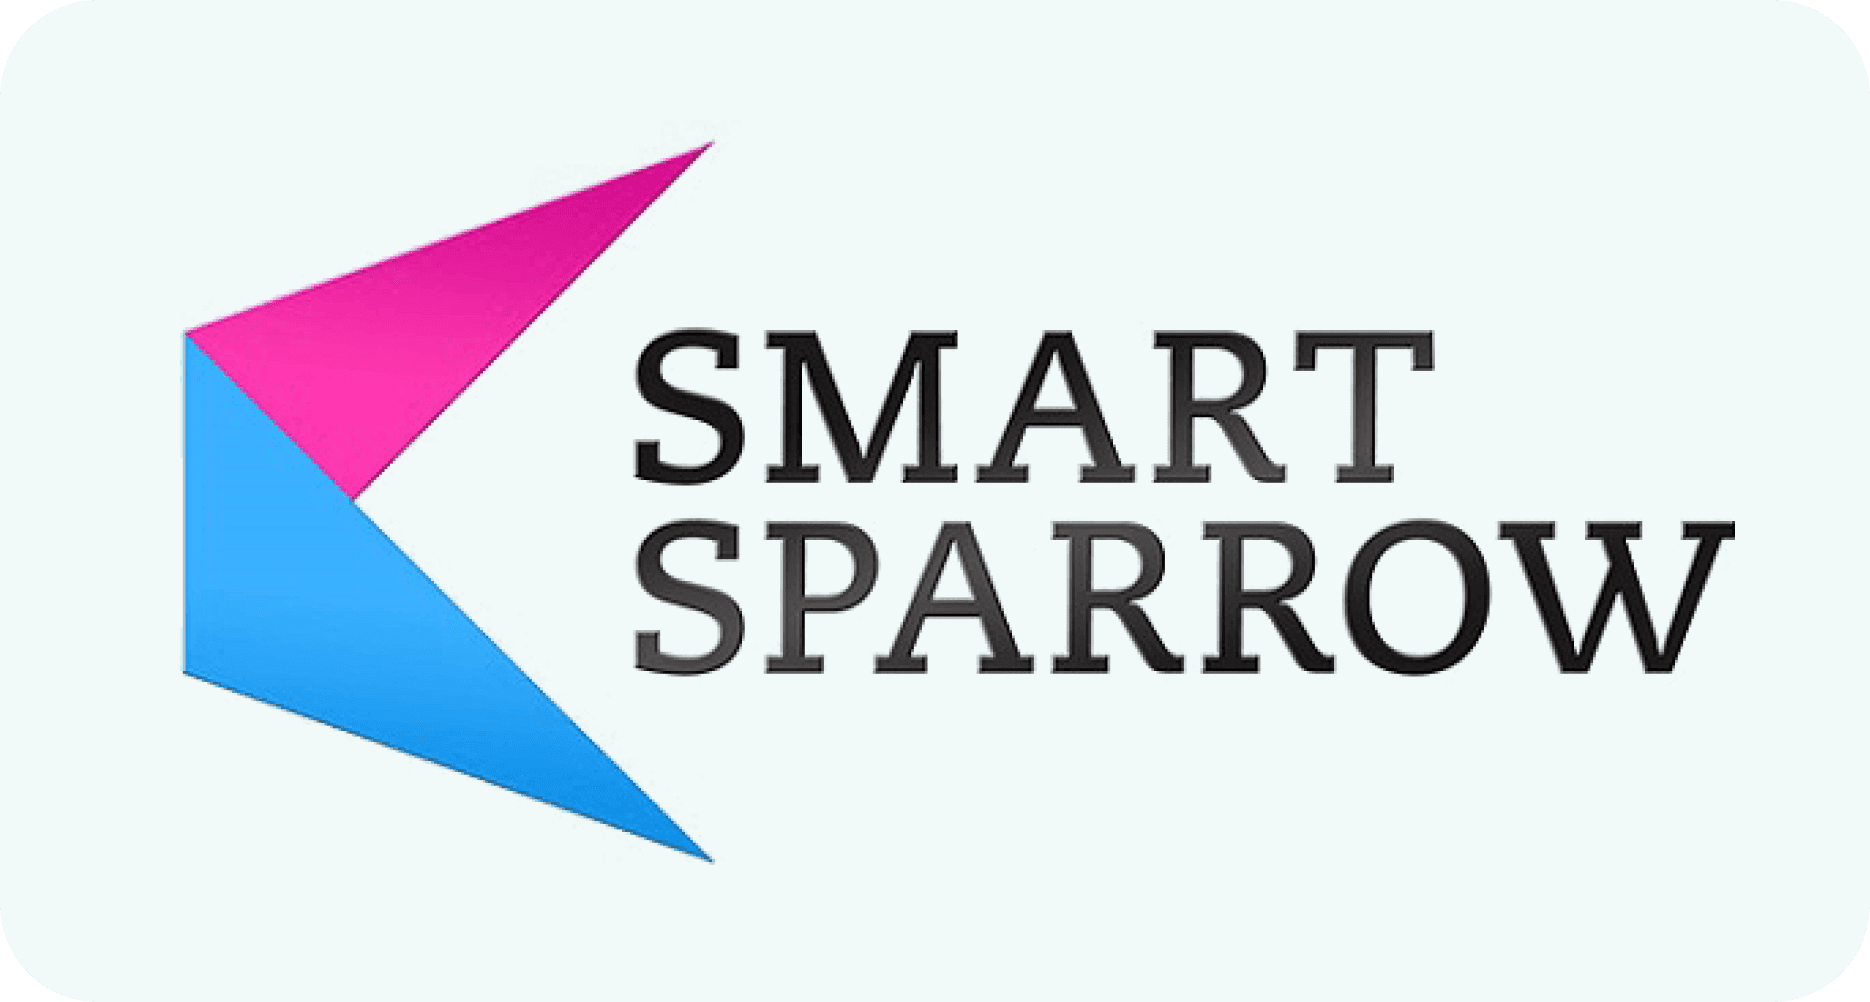 Smart Sparrow Logo as an app that features adaptive learning